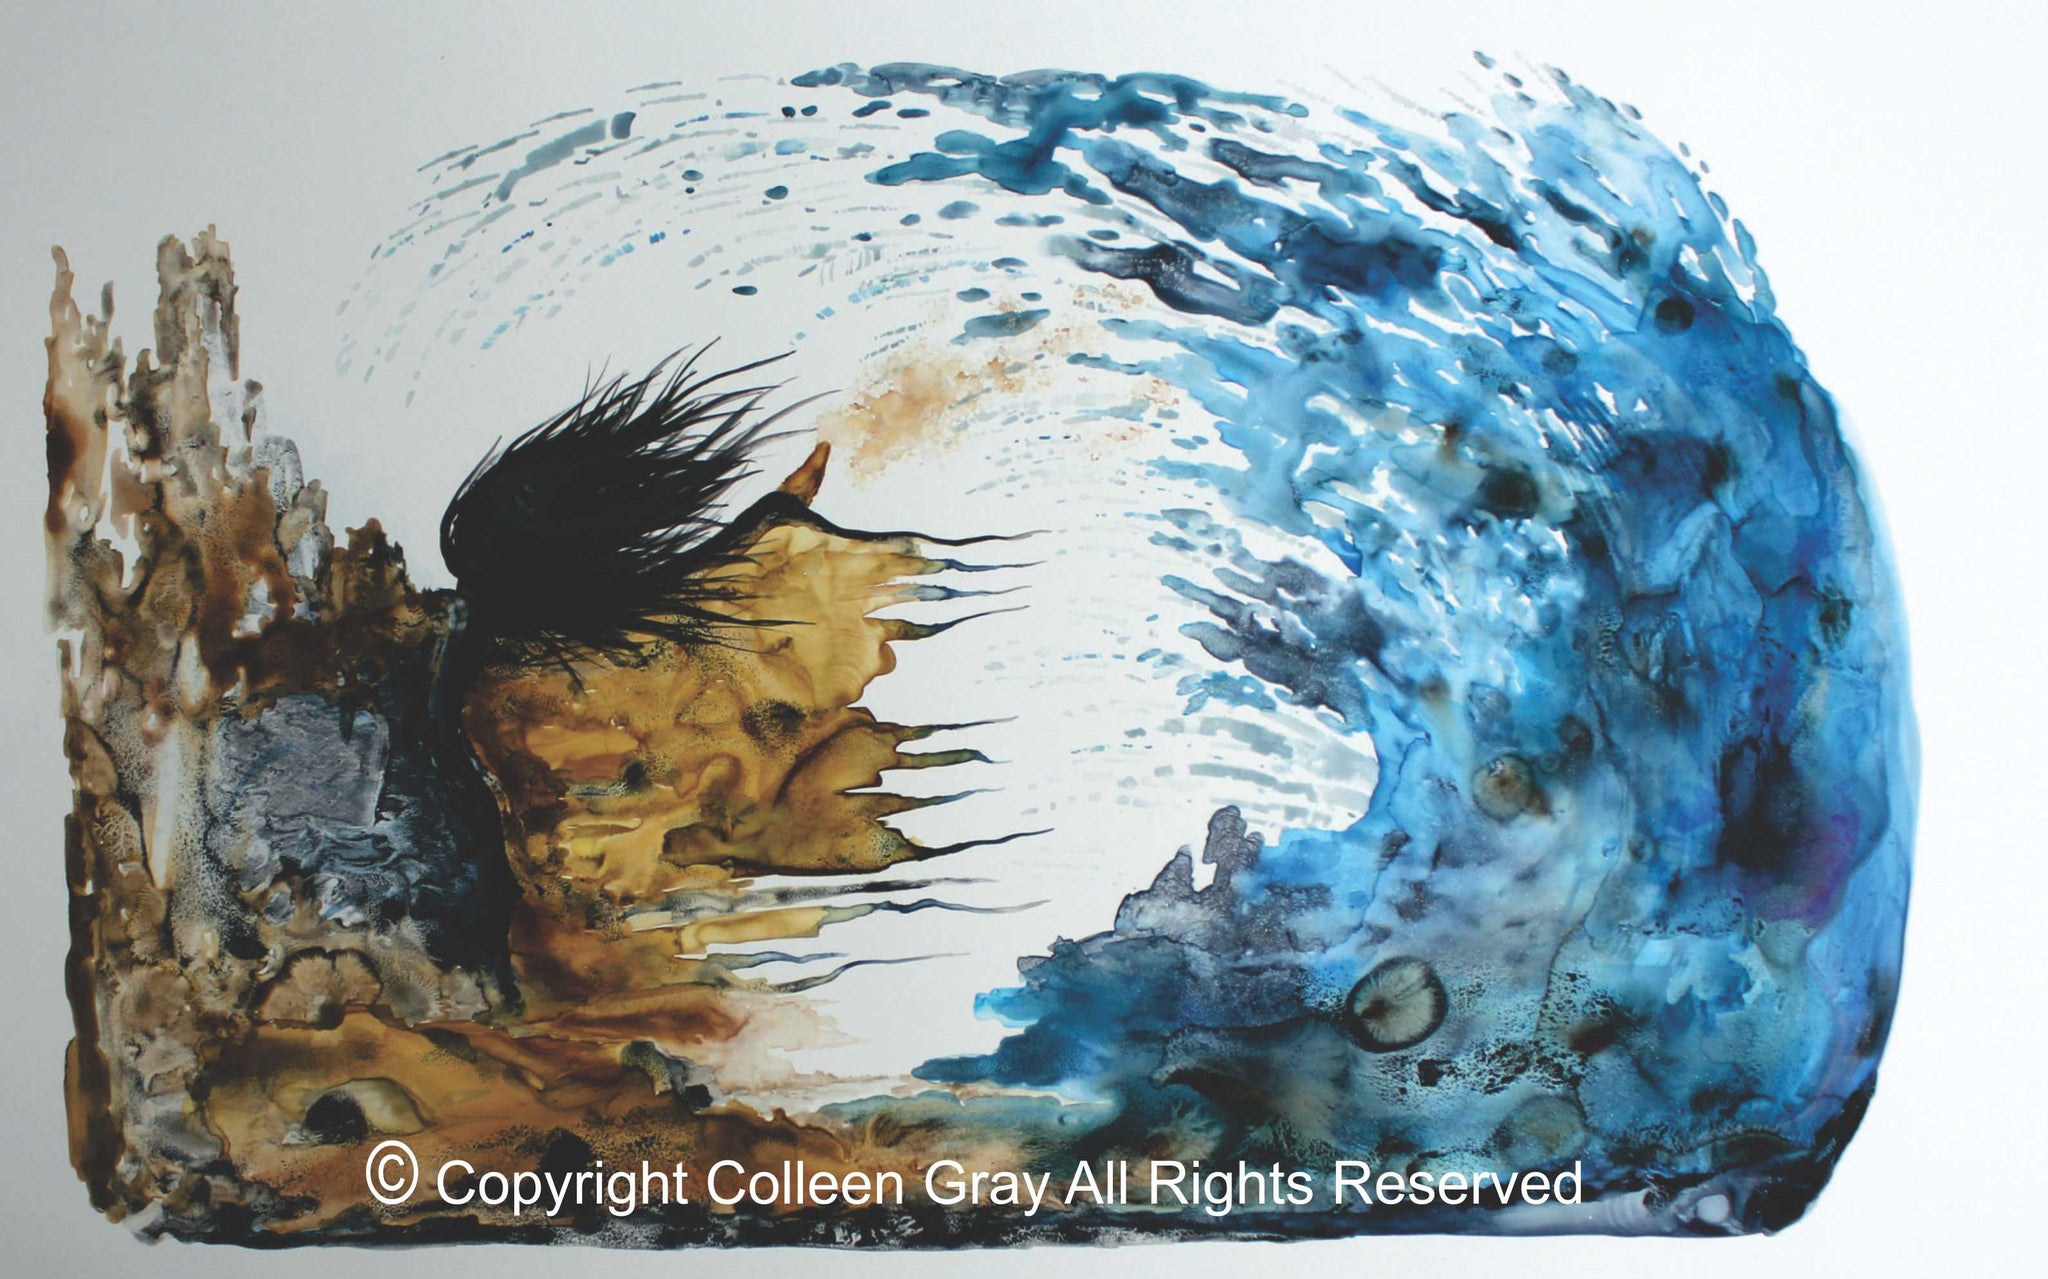 Image of Title: Woman Art Card by Metis Artist Colleen Gray Indigenous Canadian Art Work. Woman with long flowing hair, outstretched arms, water huge wave. For sale at https://artforaidshop.ca